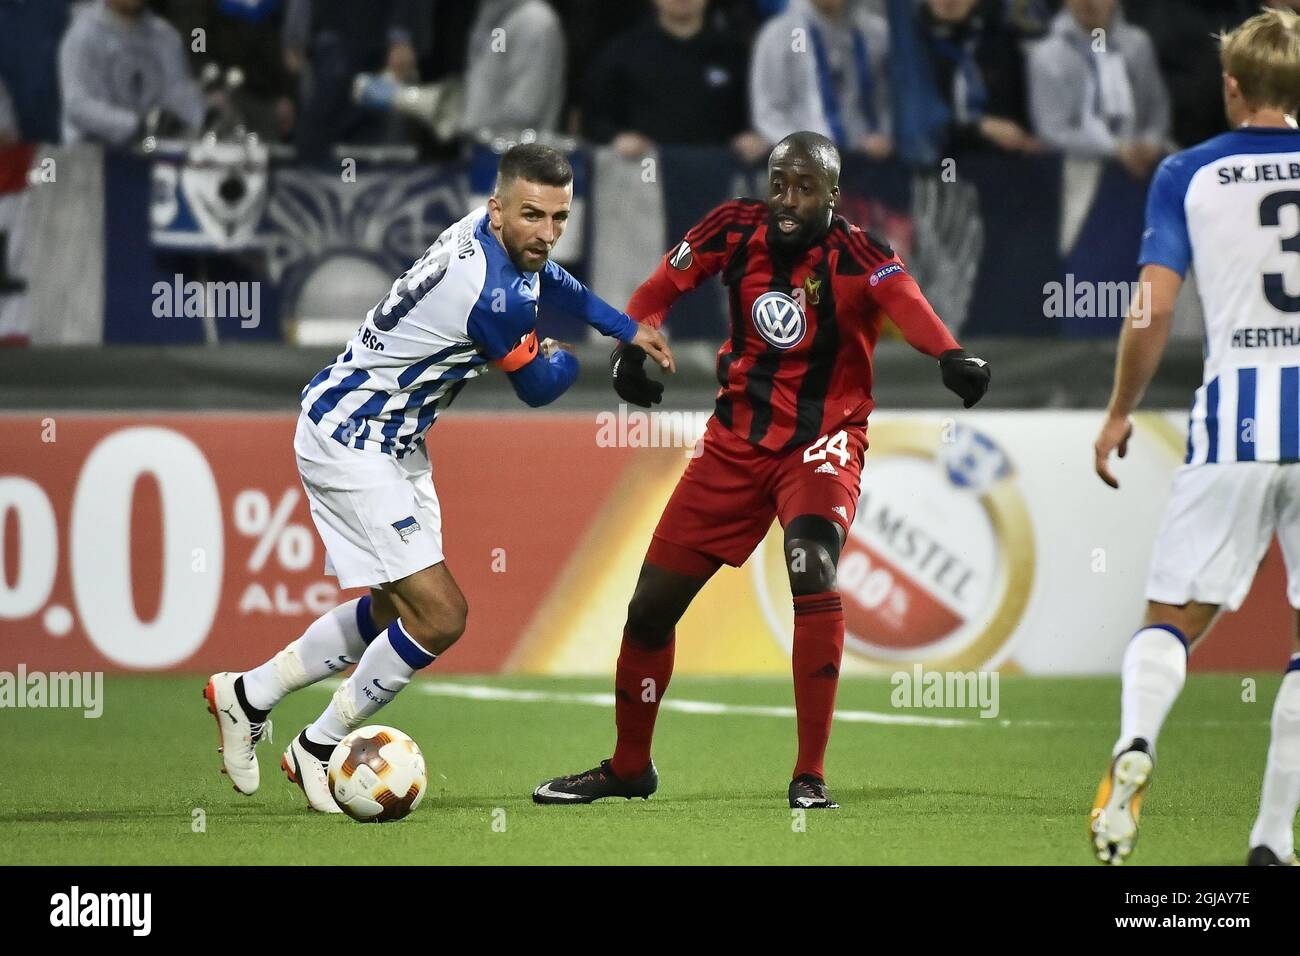 Hertha's Vedad Ibisevic (L) fights for the ball with Ostersunds Ronald Mukiibi during the UEFA Europa League group J soccer match between Ostersunds FK and Hertha Berlin at Jamtkraft Arena in Ostersund, Sweden, on Sept. 28, 2017. Photo: Robert Henriksson / TT / code 11393  Stock Photo